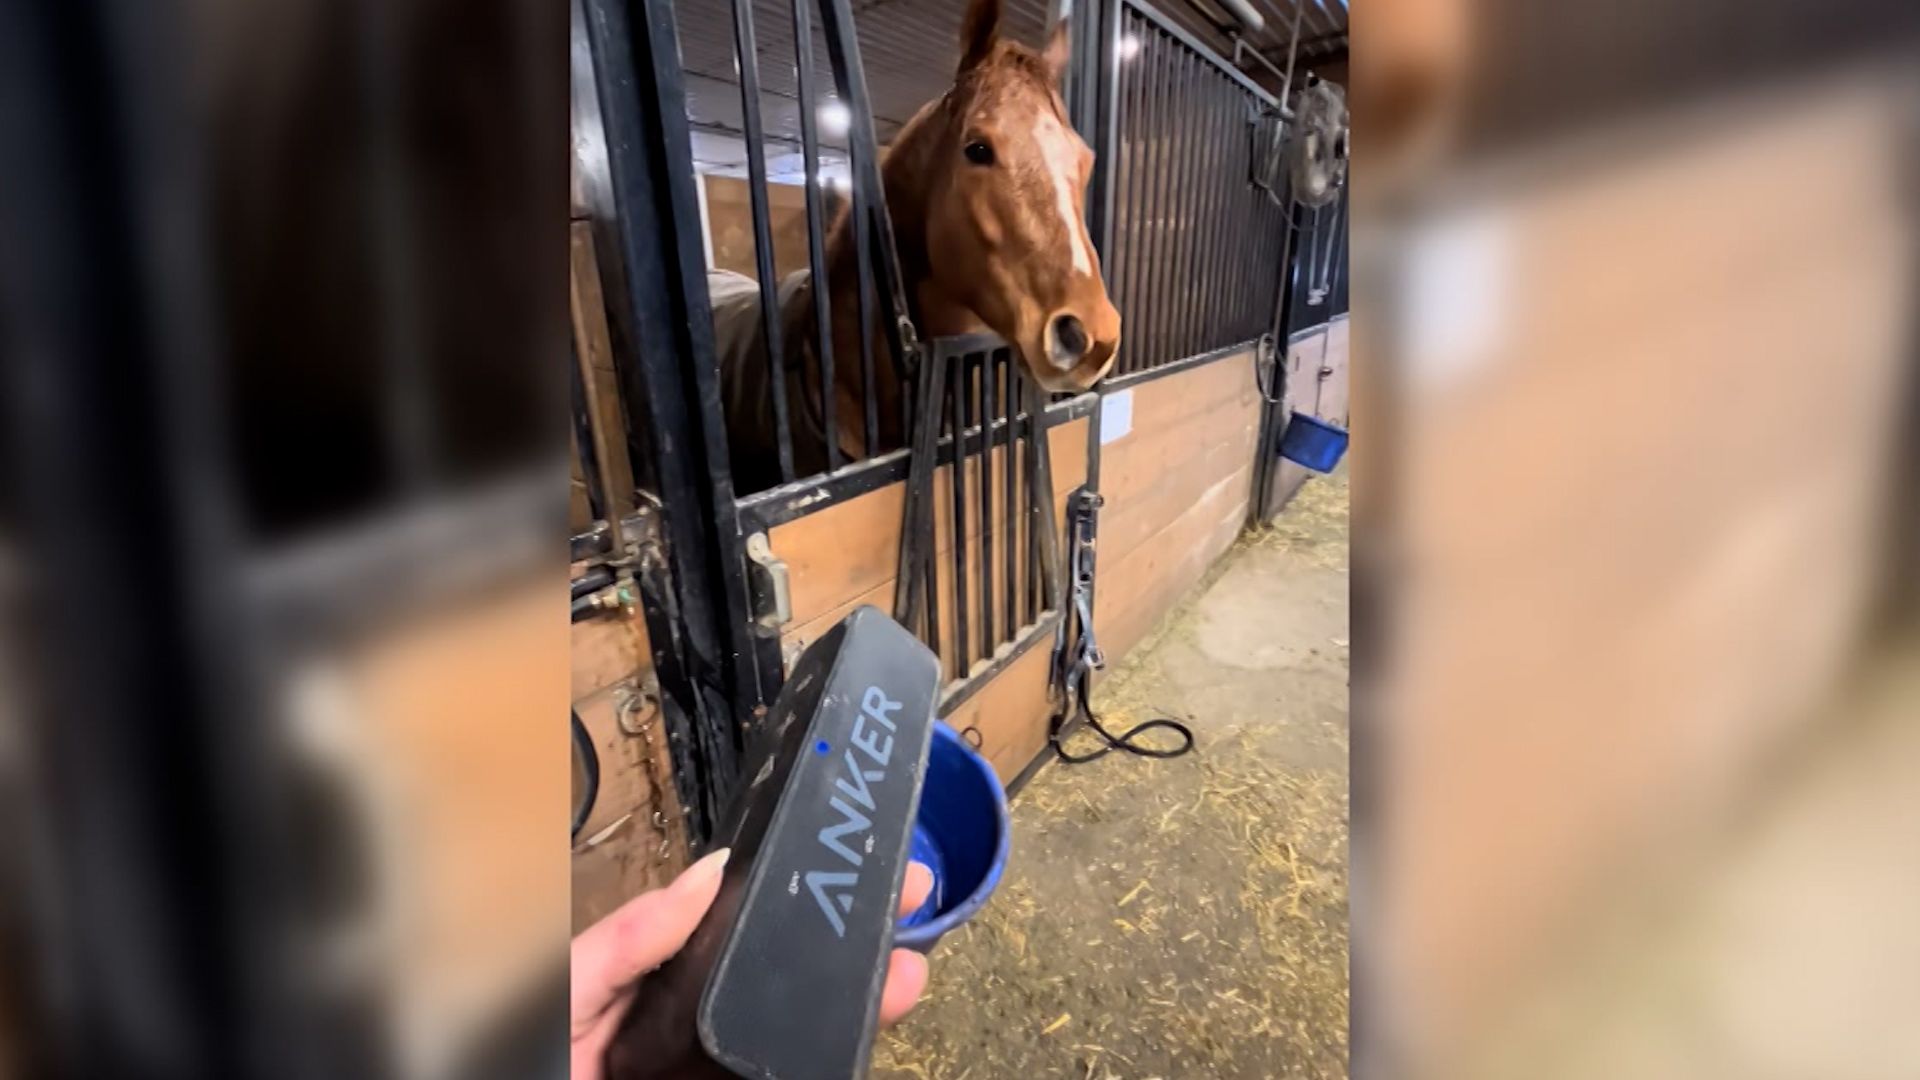 Headbanging horse goes viral for its love of metal music